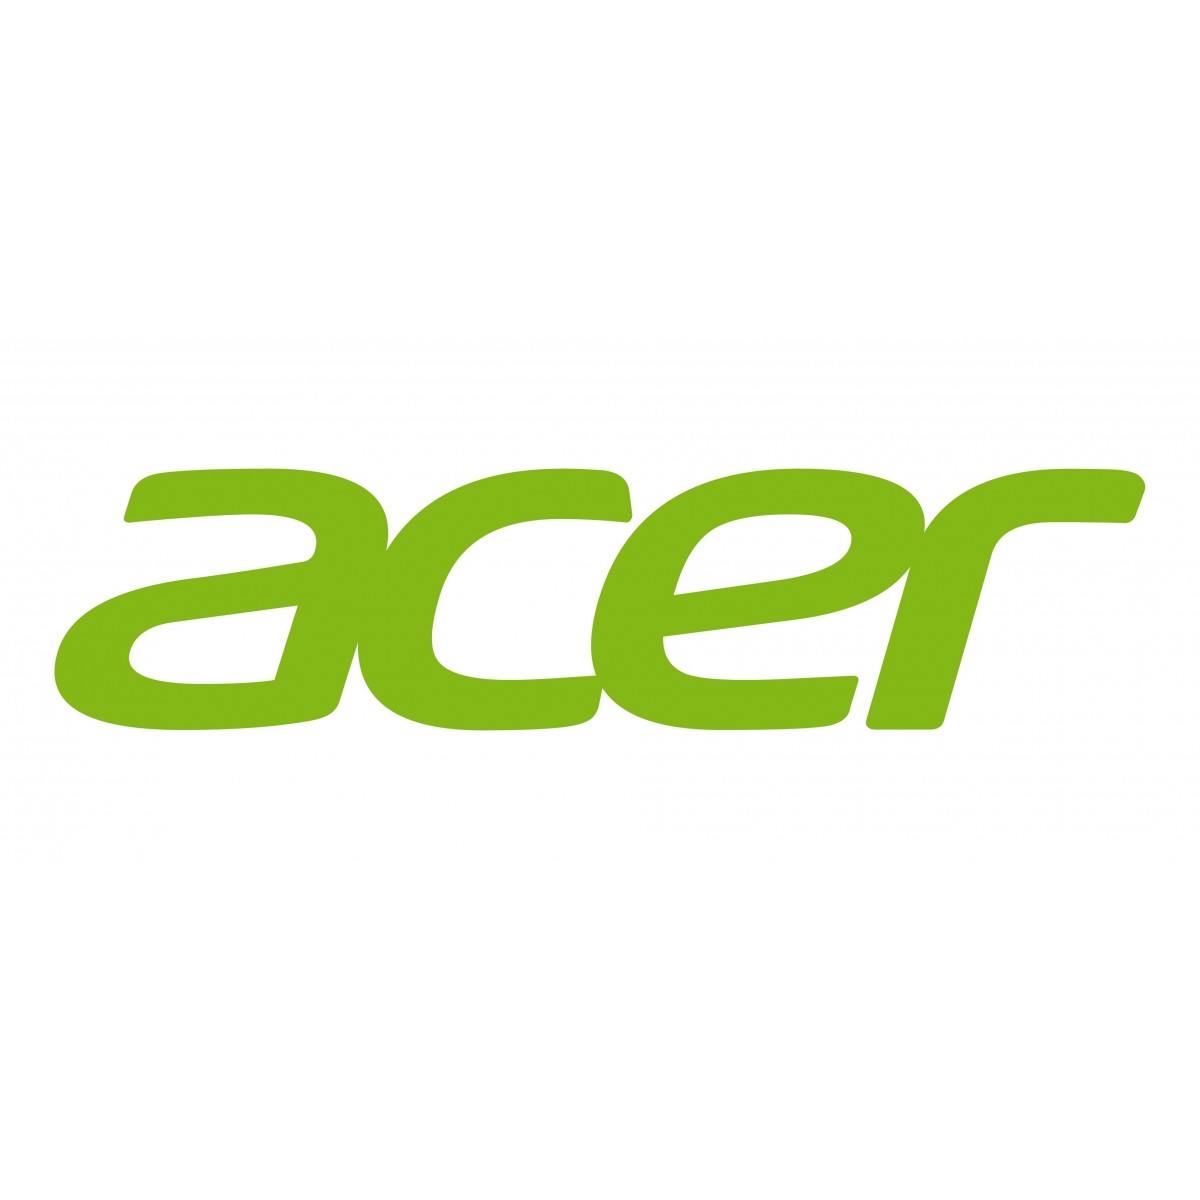 Acer MC.JPC11.002 - UHP - 240 W - 4000 h - Acer - H7850/V7850